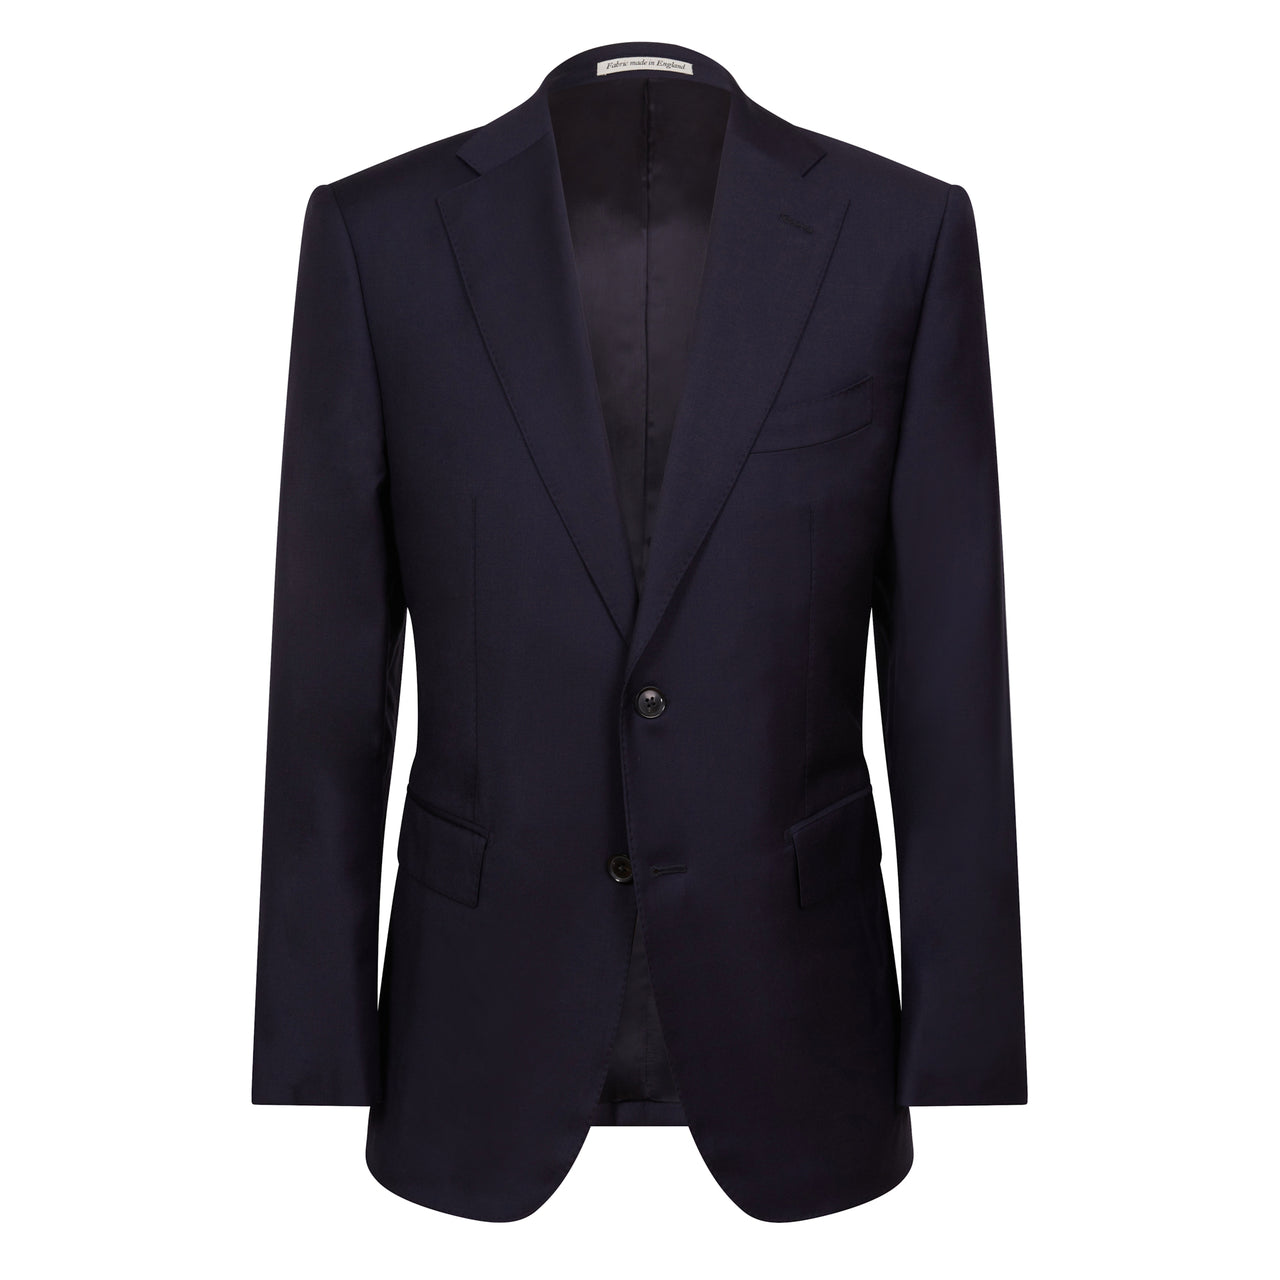 HENRY SARTORIAL X DORMEUIL Full Canvas Water Repellent Stretch Suit NAVY REG